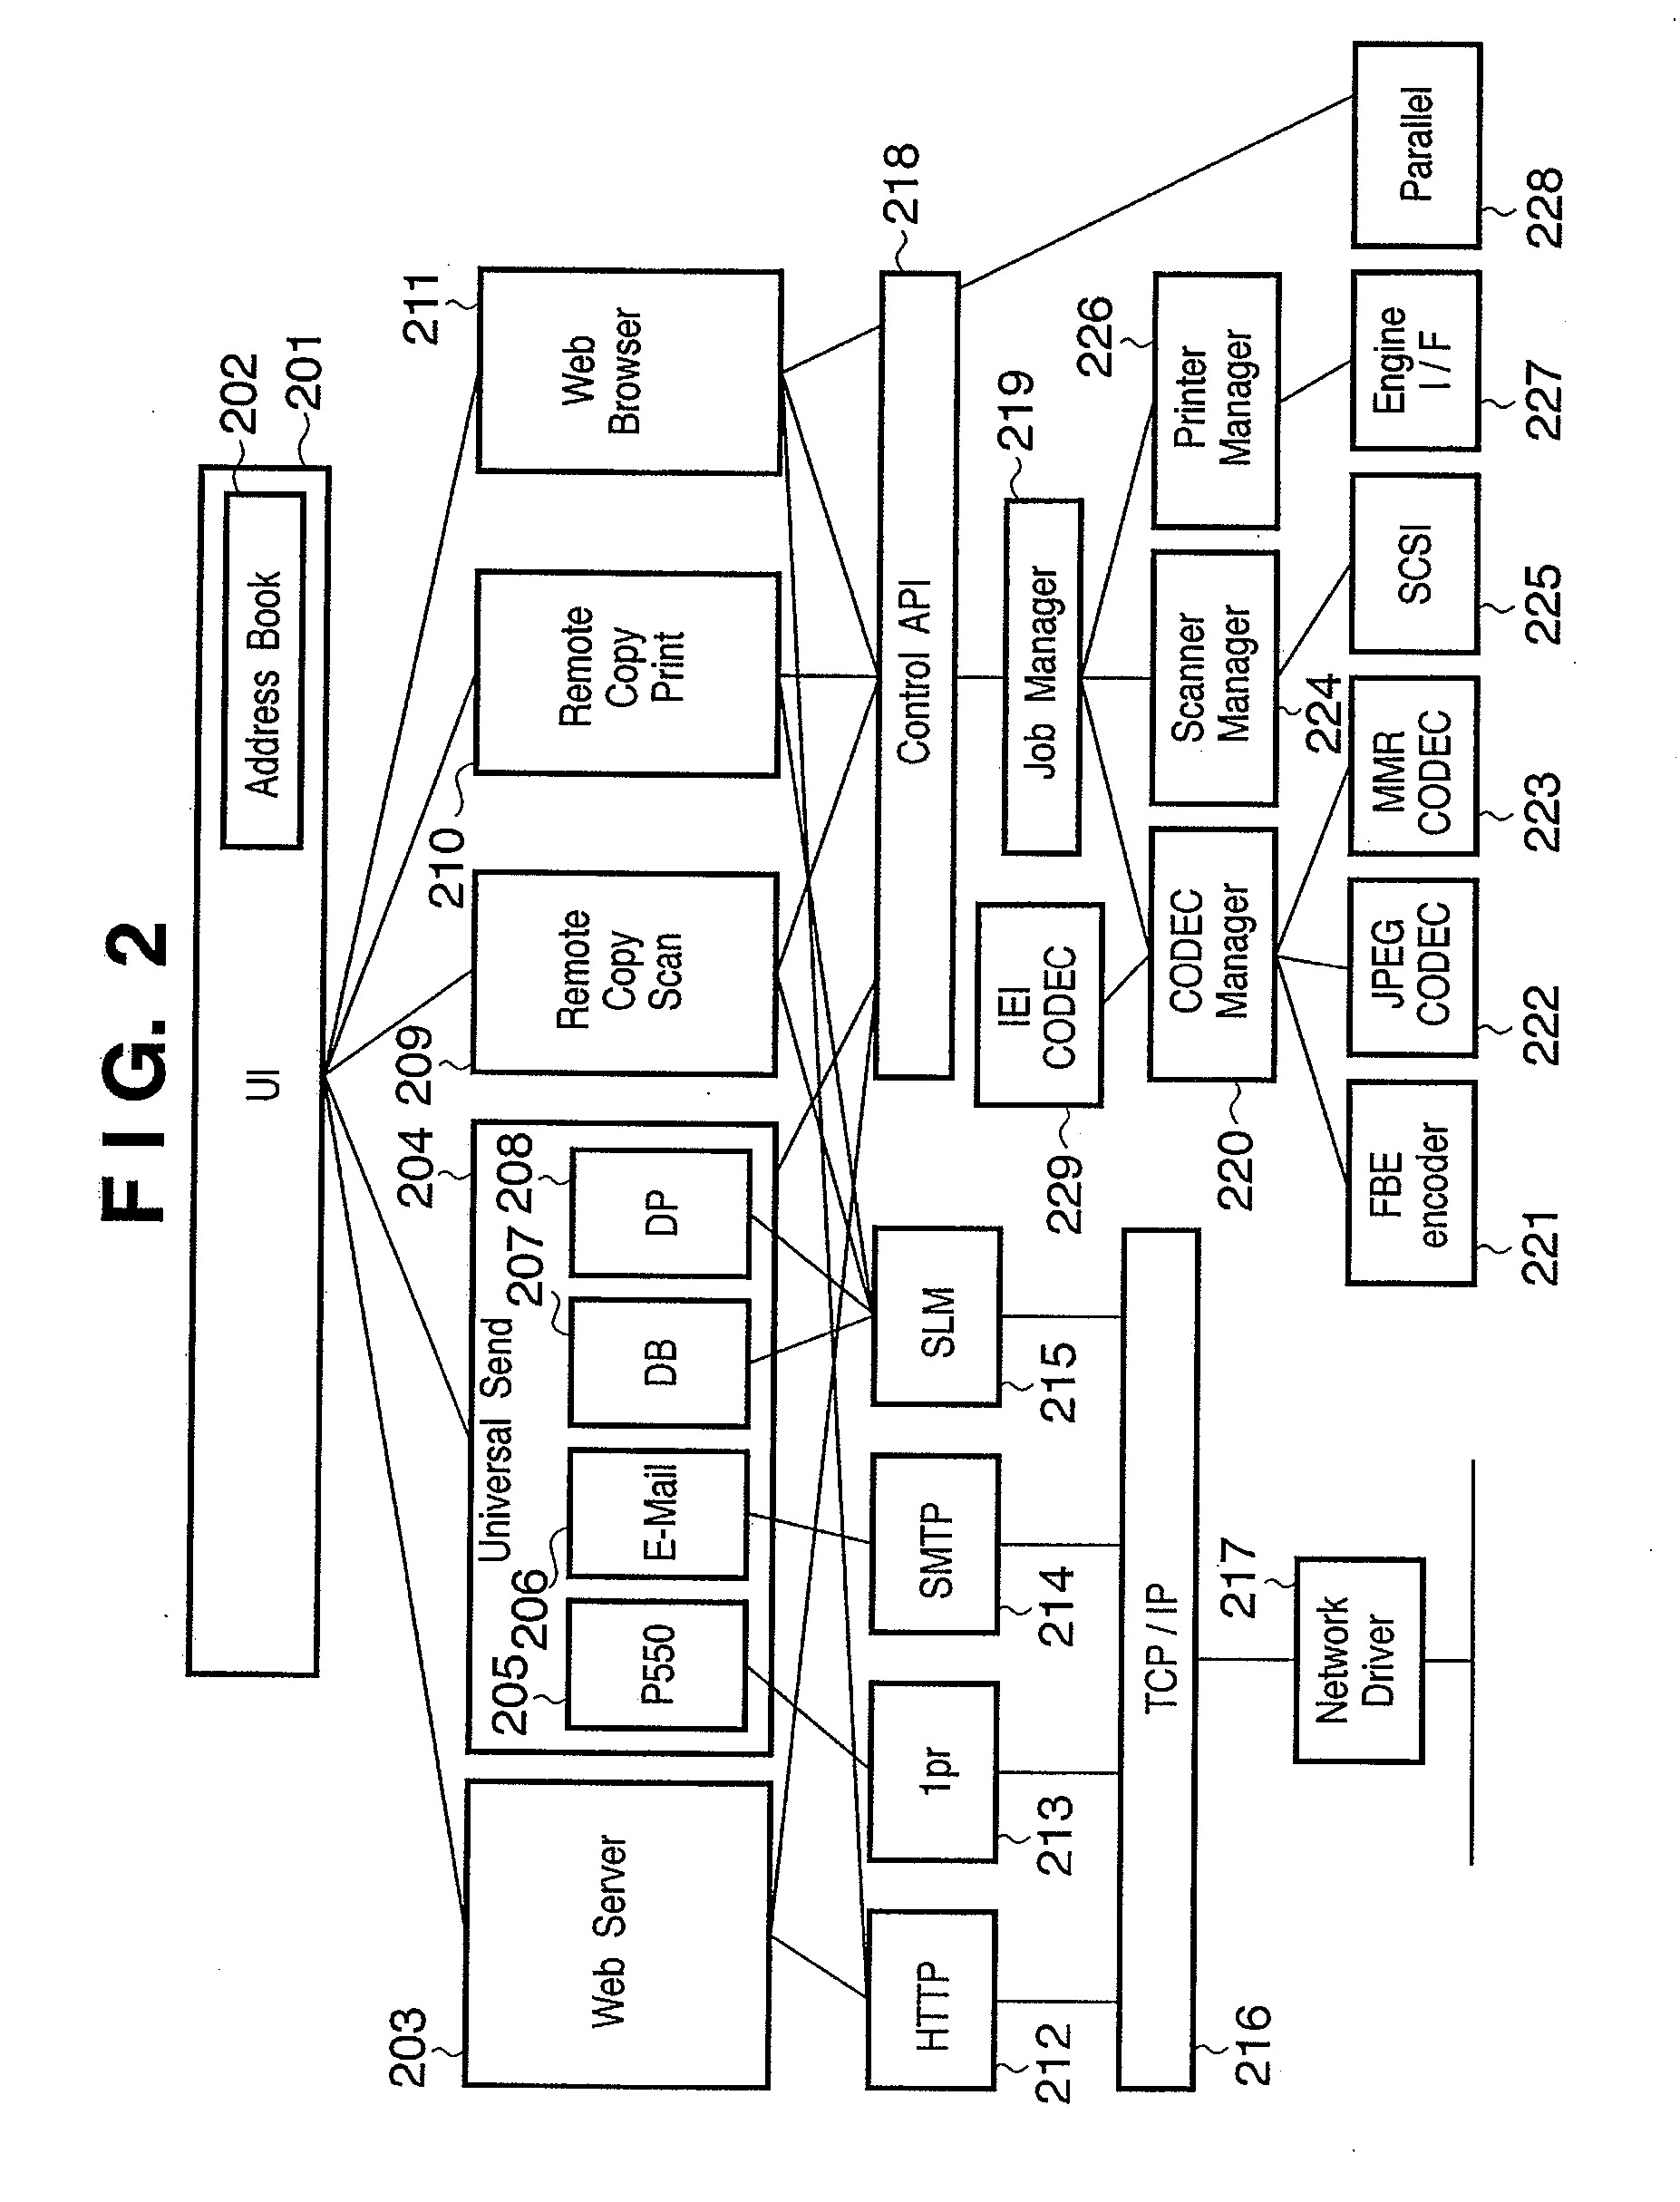 Image processing apparatus, control method thereof, and program